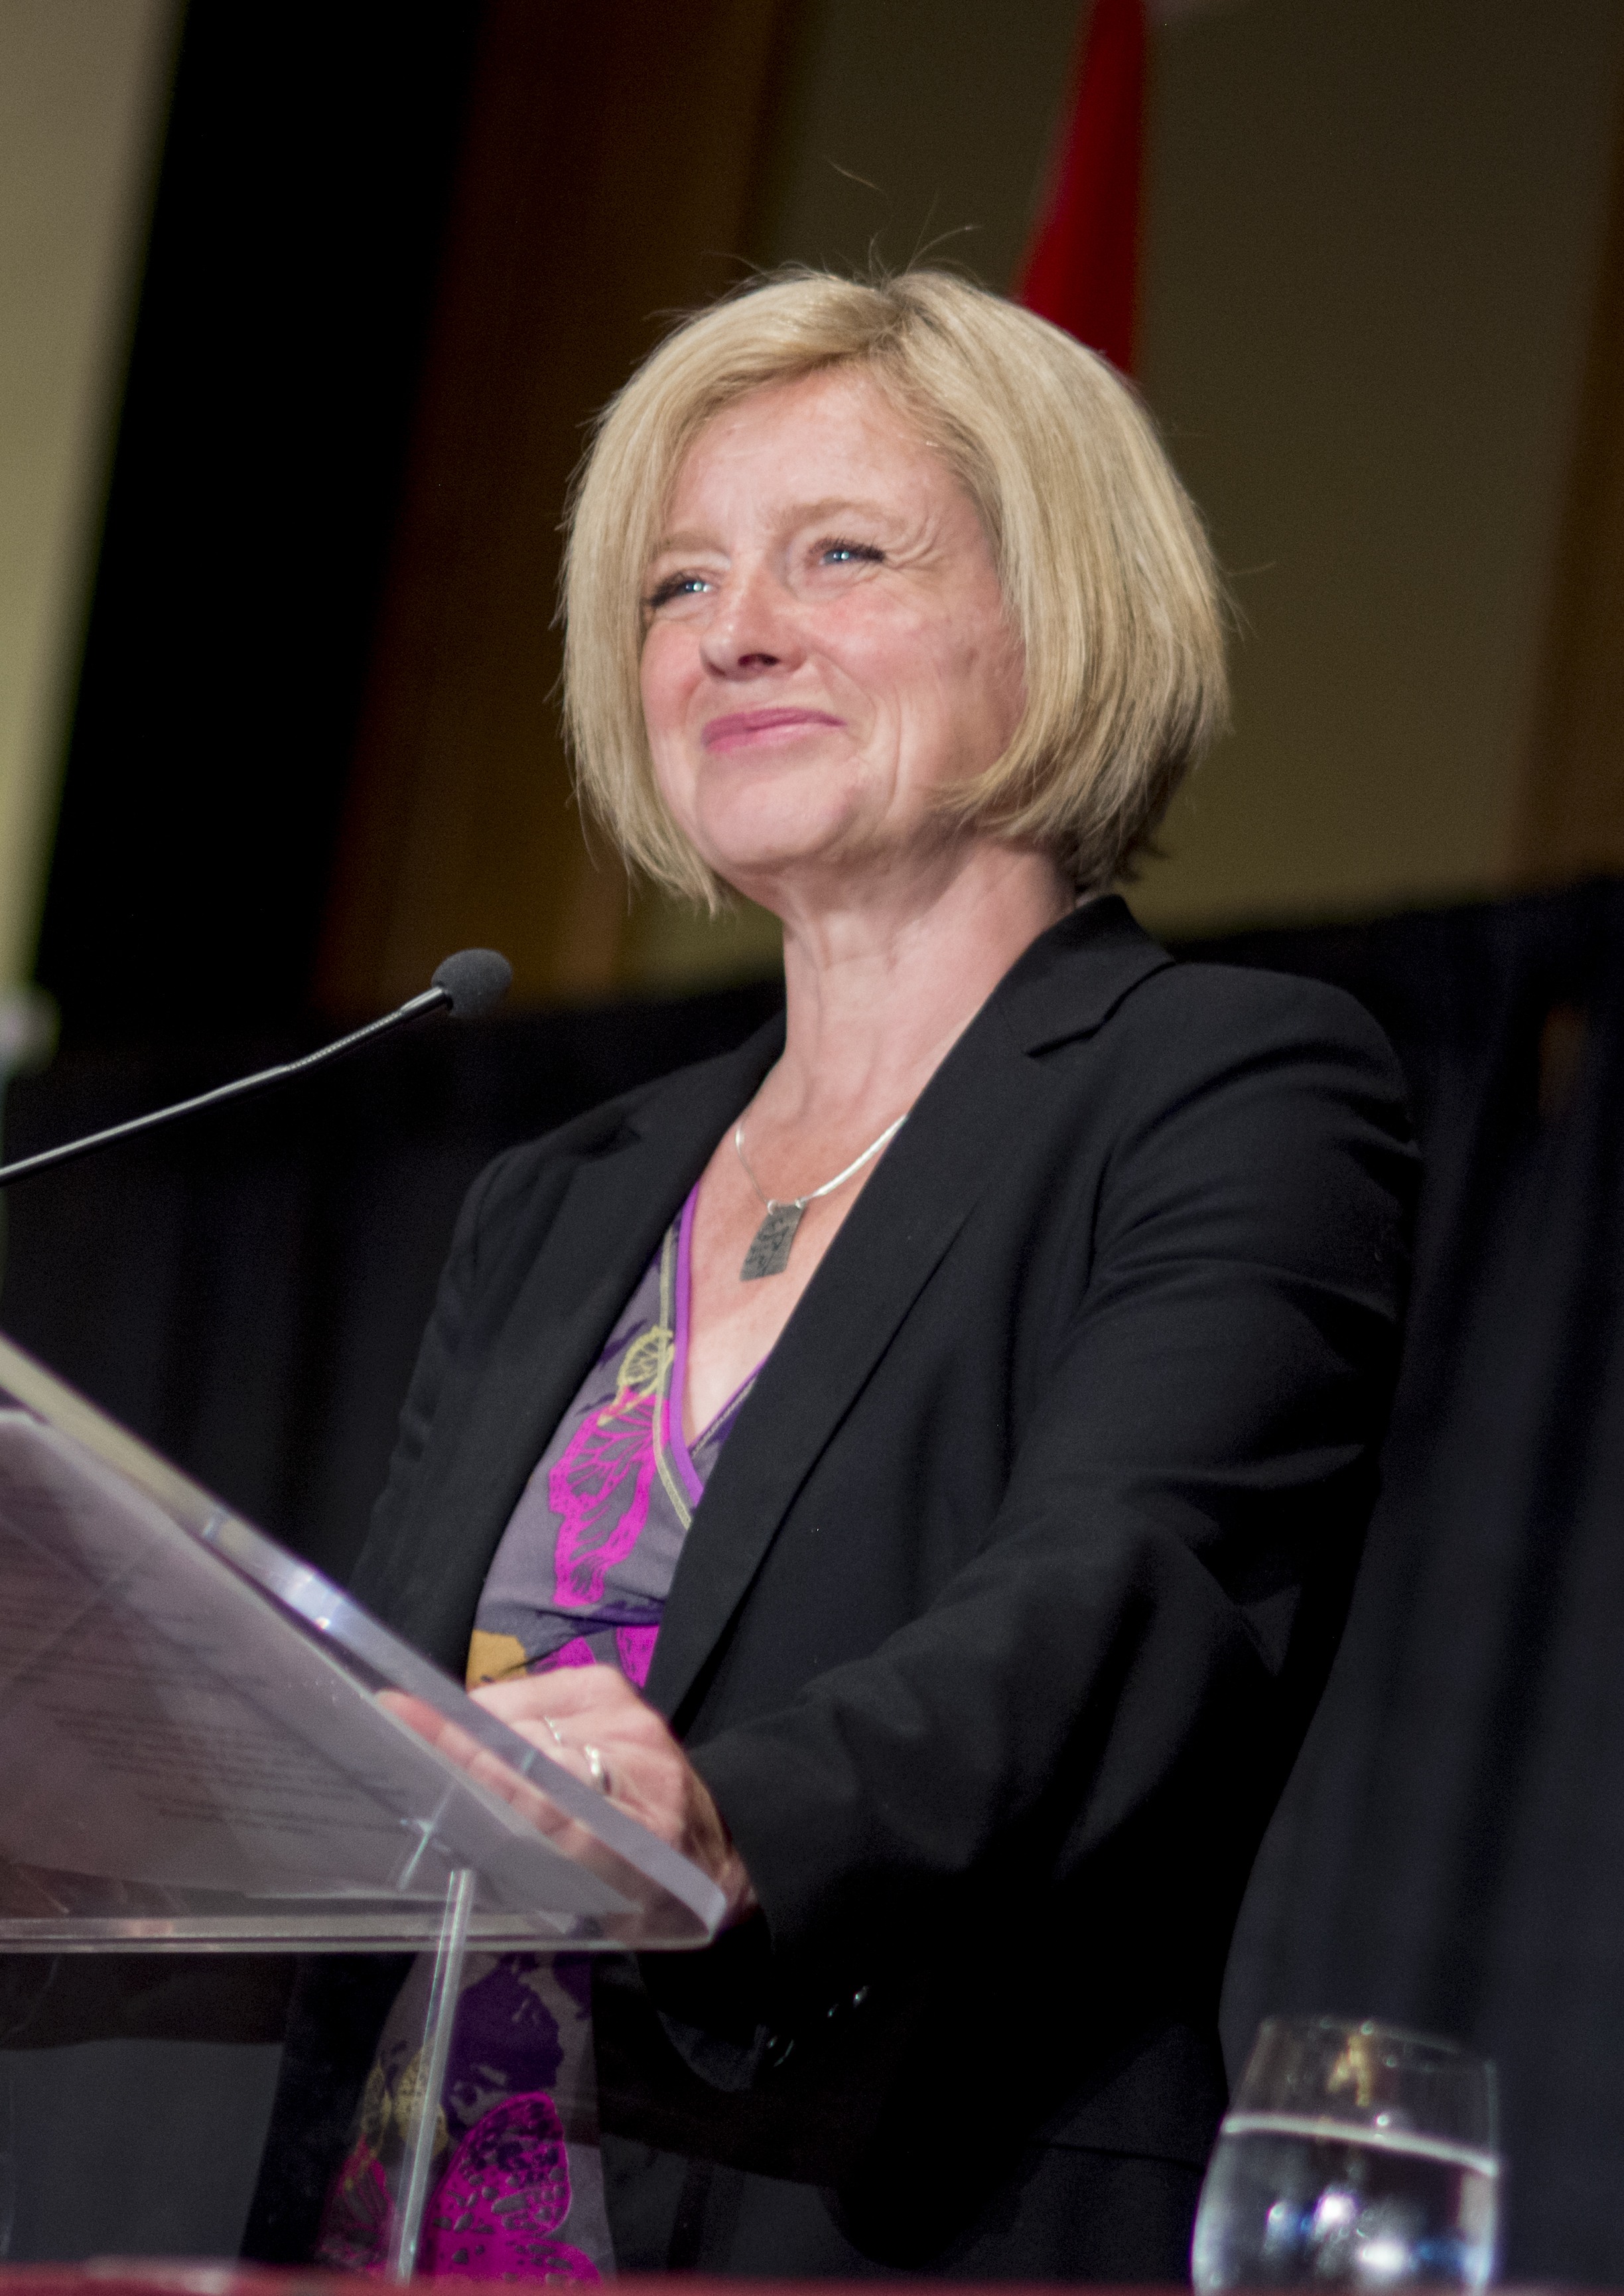 FIRST MEETING – Premier Rachel Notley spoke before more than 140 New Democrat Party members during the party’s first provincial council meeting held at the Sheraton Hotel and Conference Centre this past Saturday.